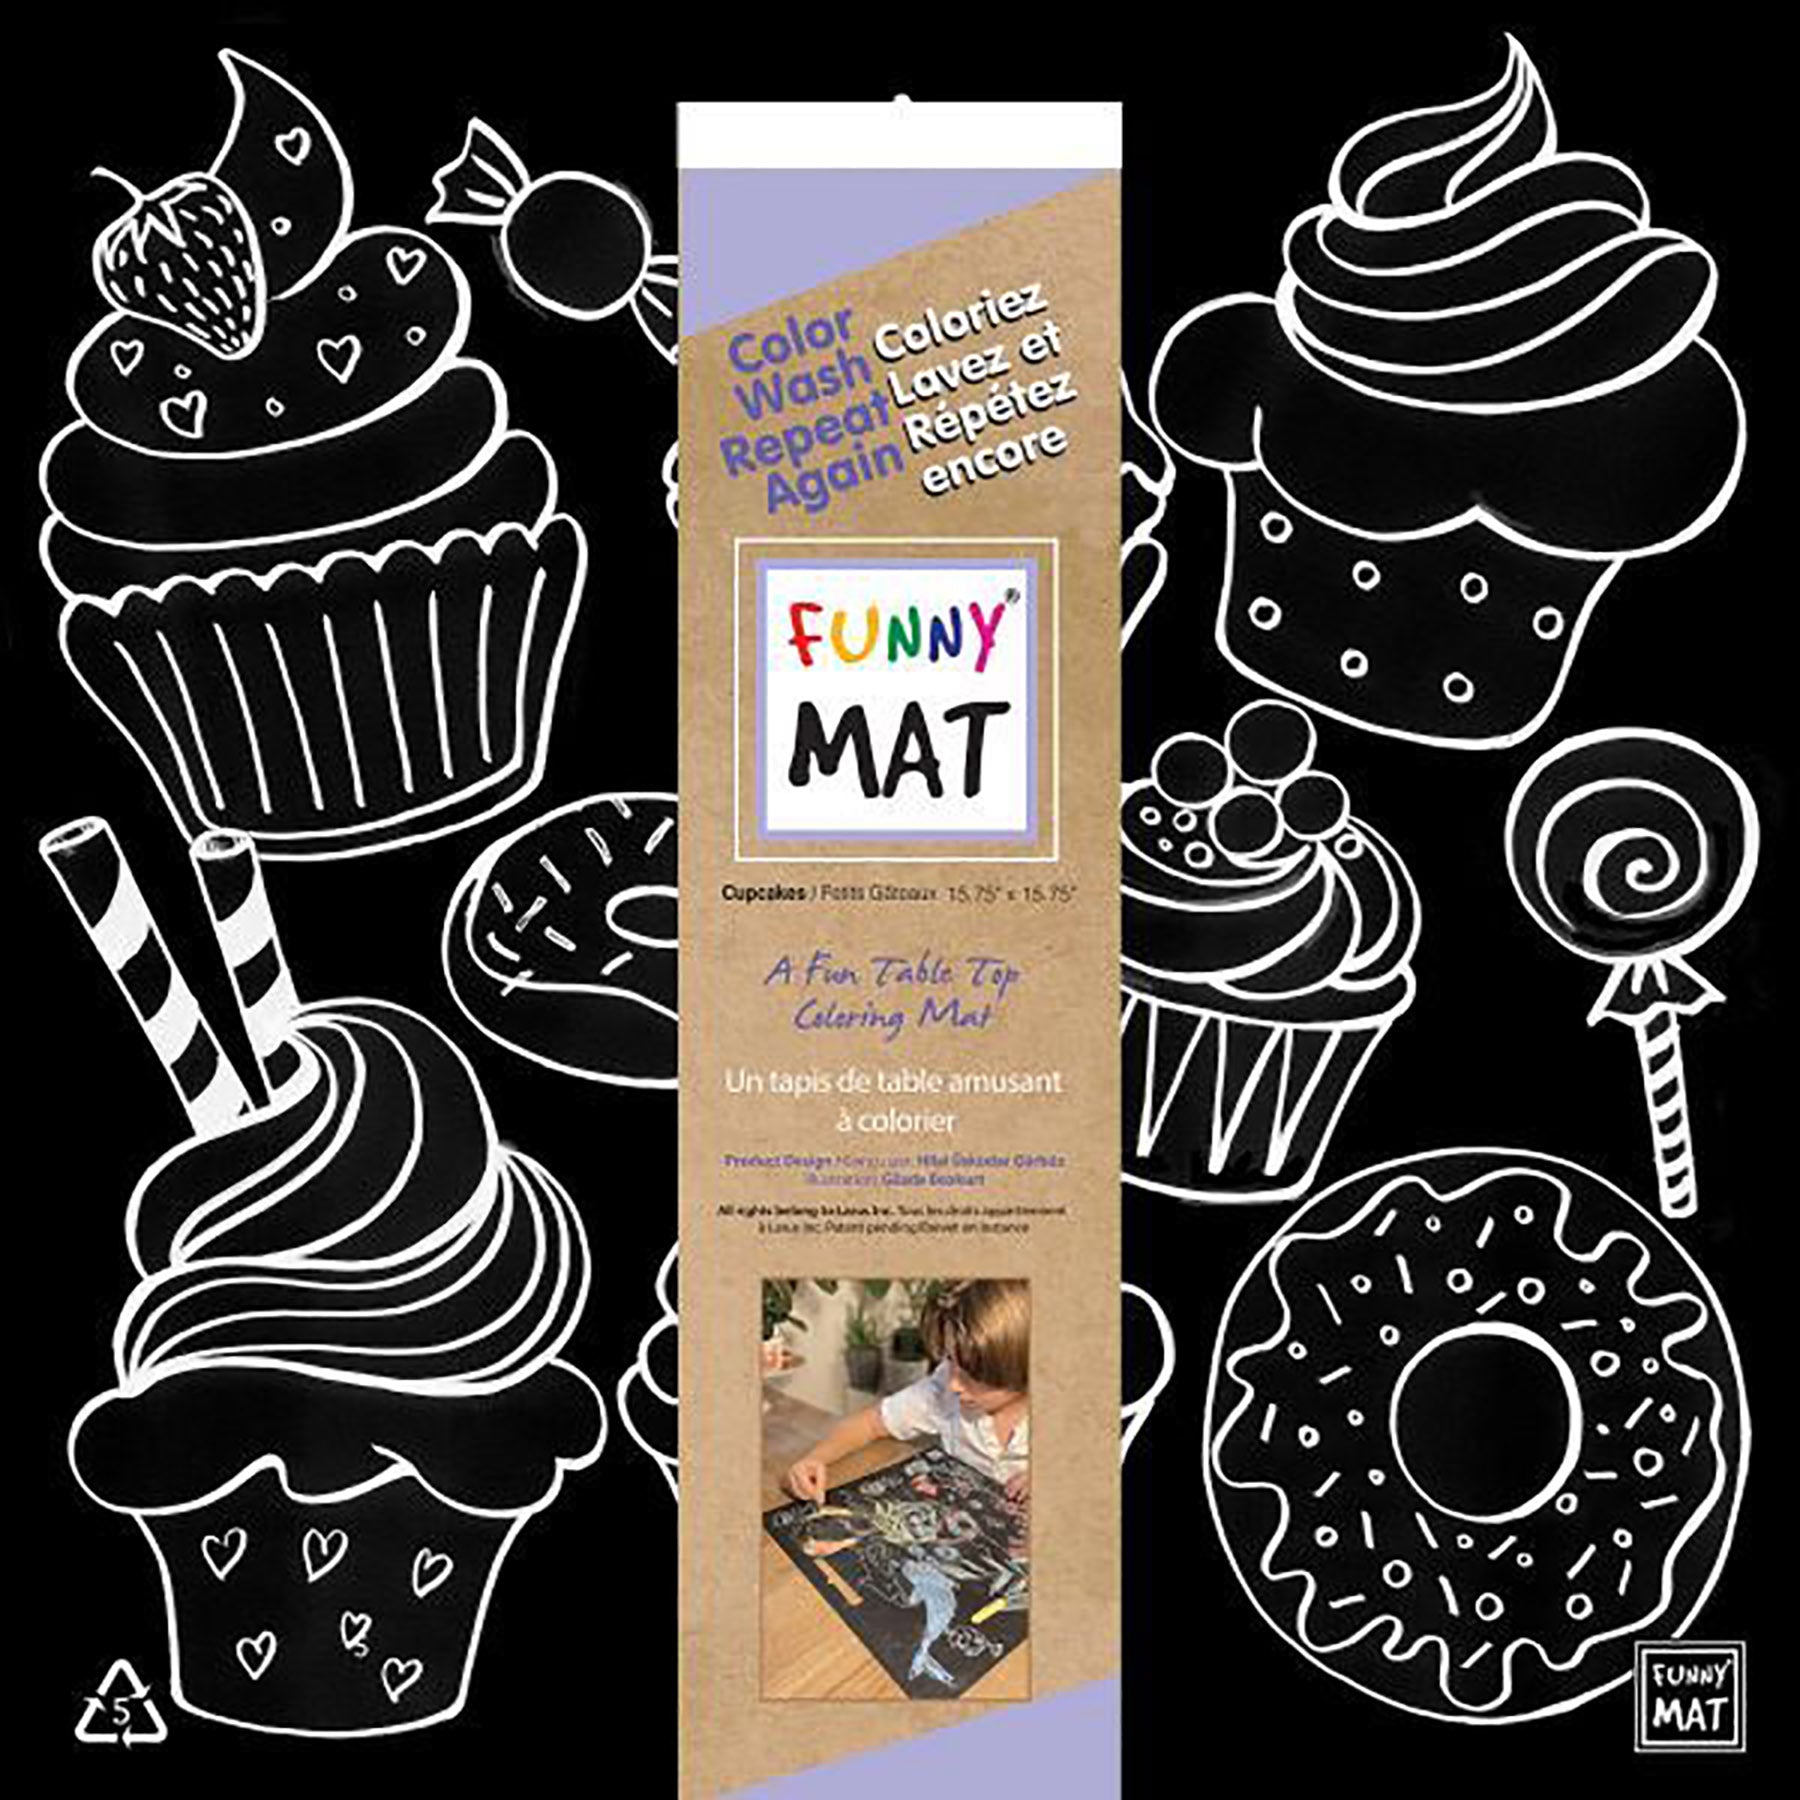 Funny Mat Coloring Placemat - Cupcake - Black Background 15.75x15.75in